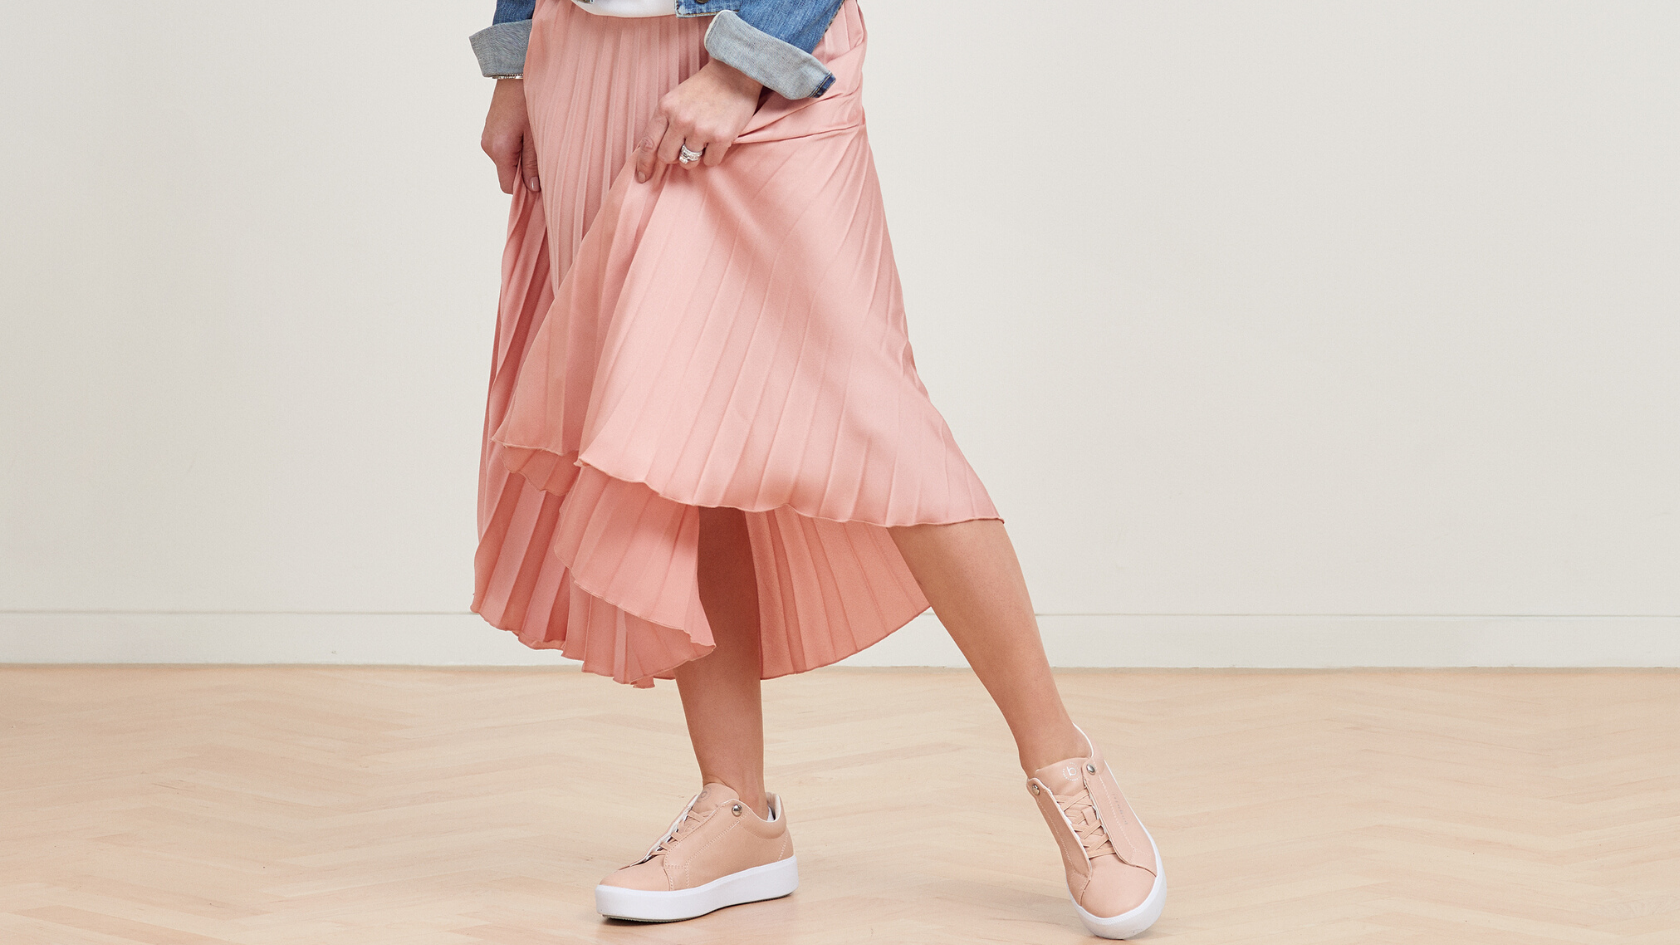 Lady posing in her pink rippled skirt with her pink bugatti sneakers in front of a neutral background